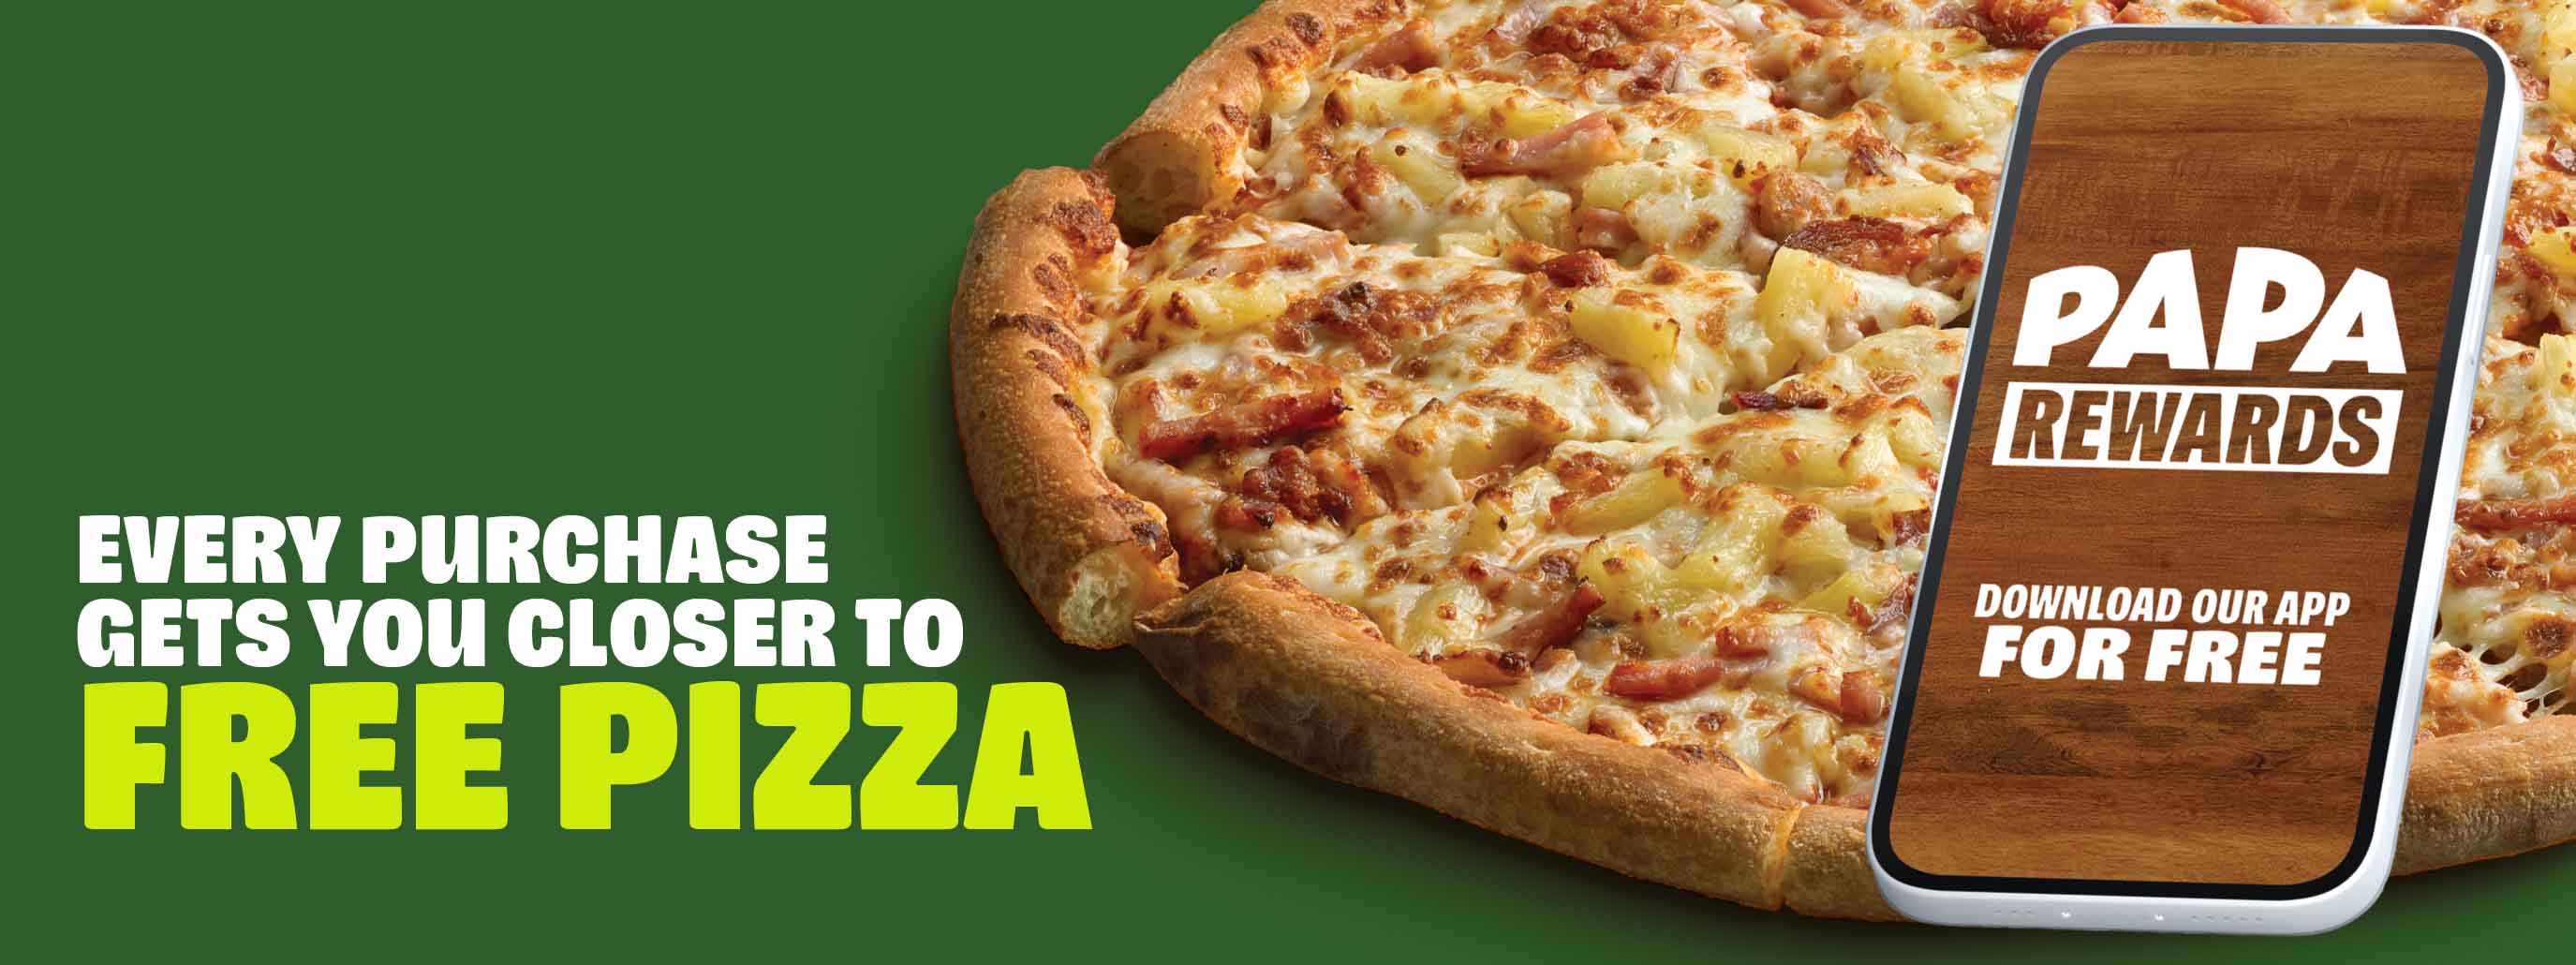 Every purchase gets you closer to free pizza, download our app.